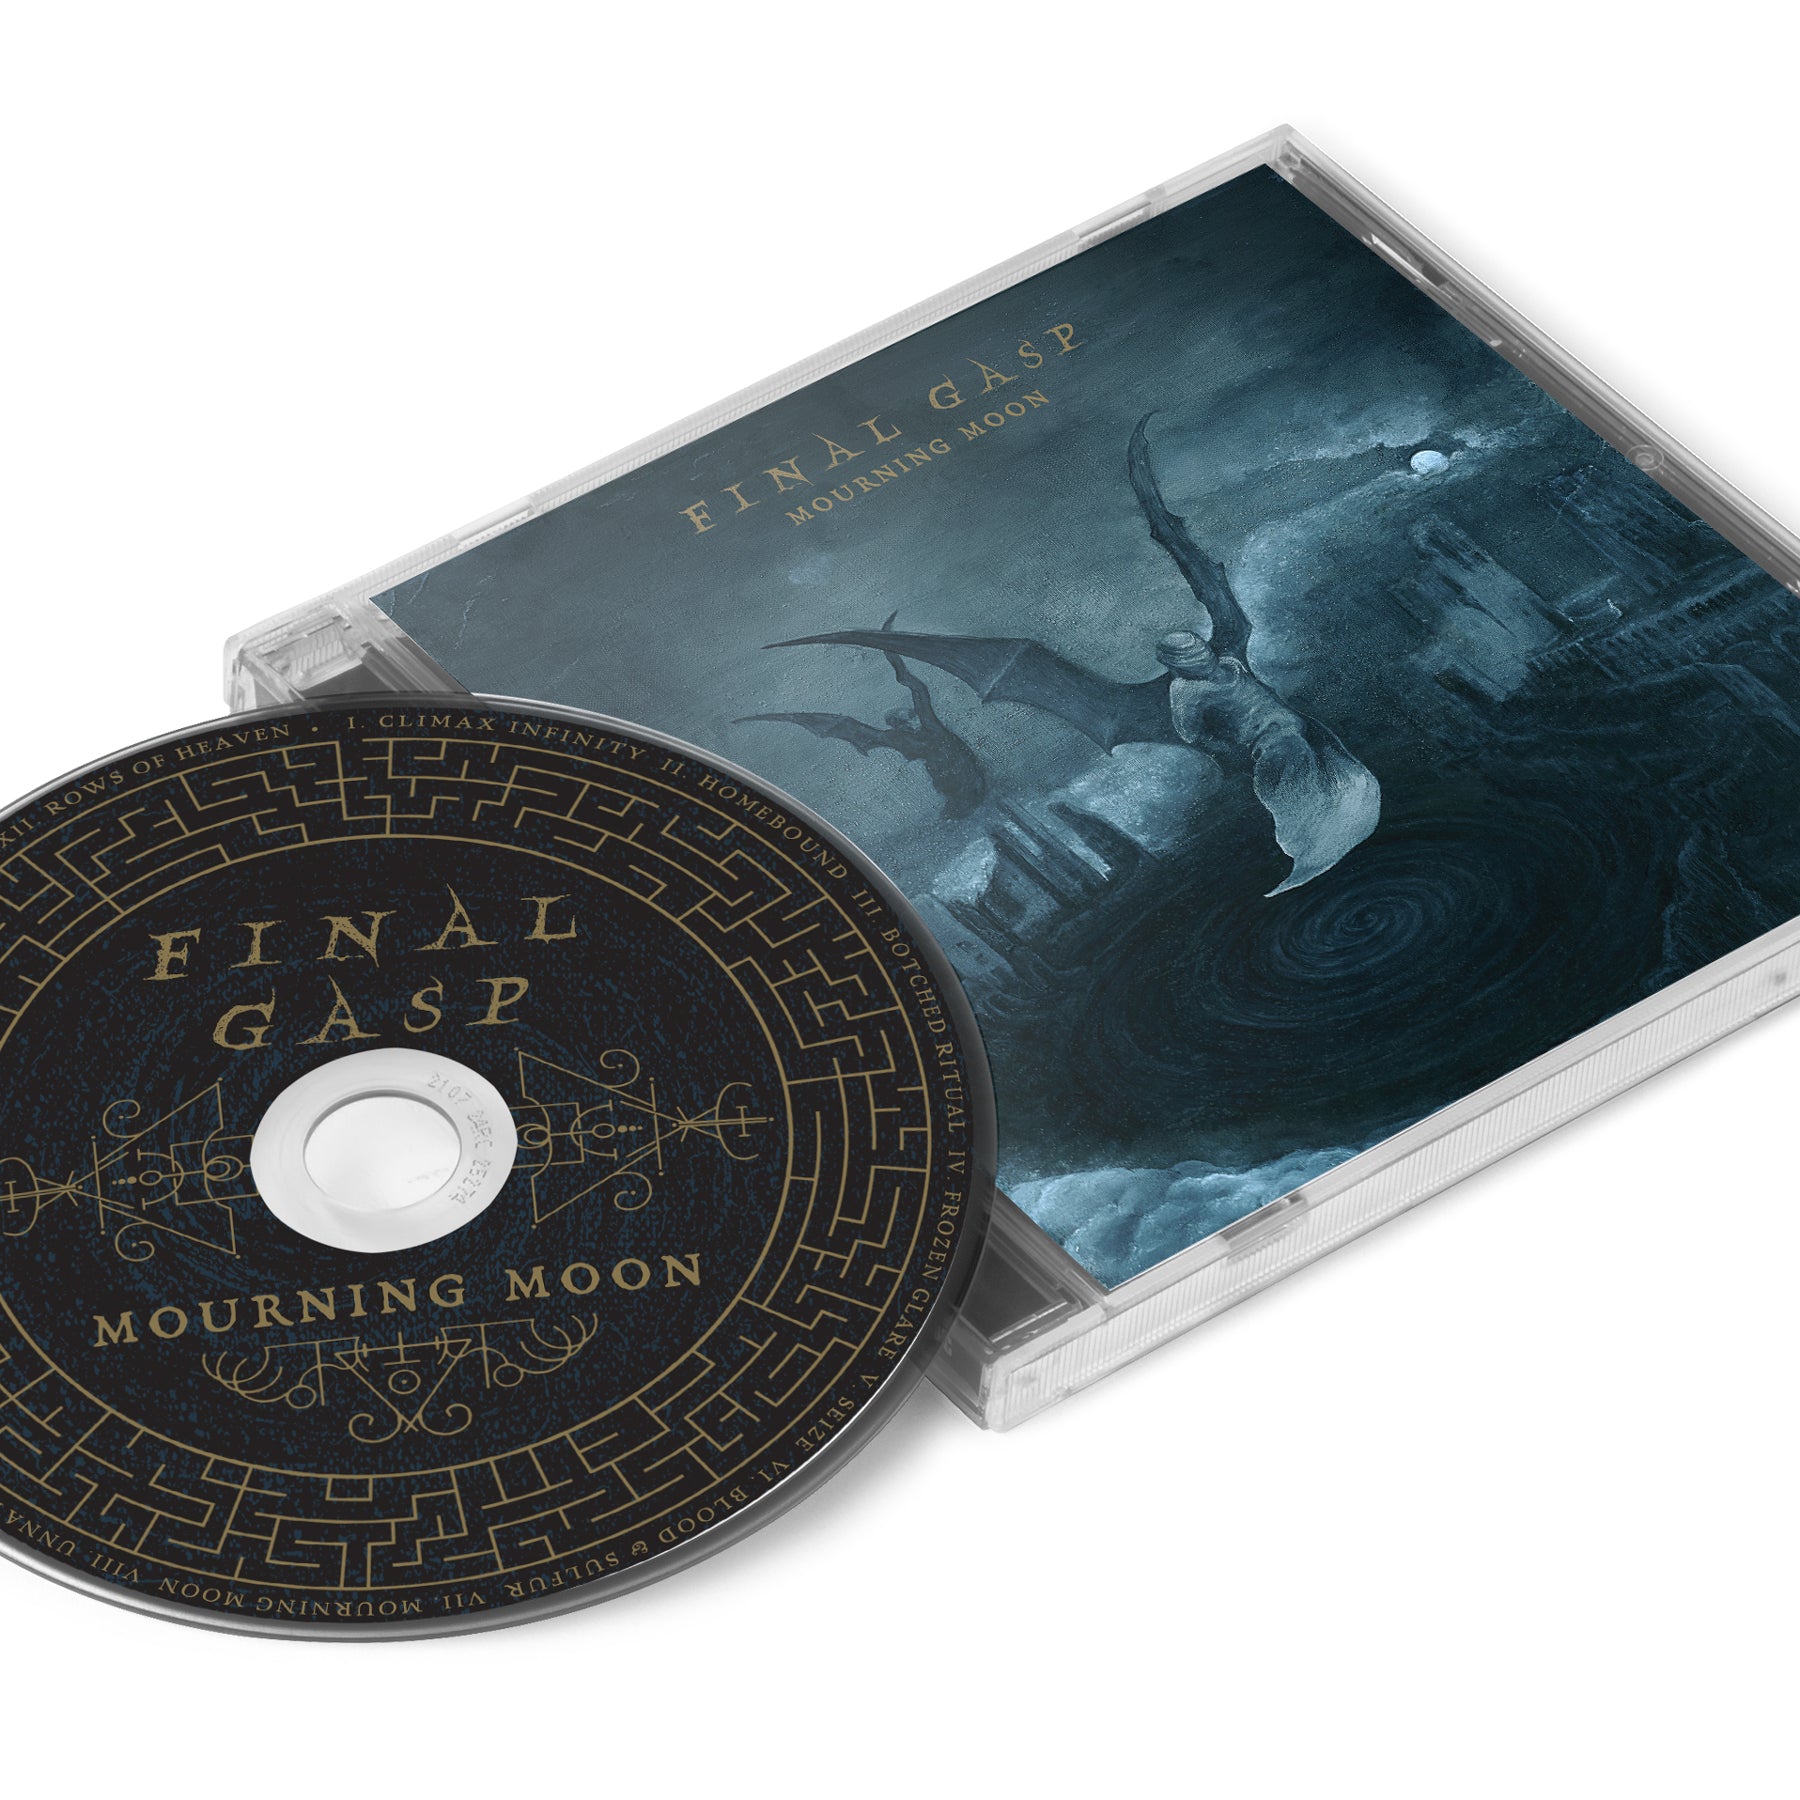 Final Gasp "Mourning Moon" CD